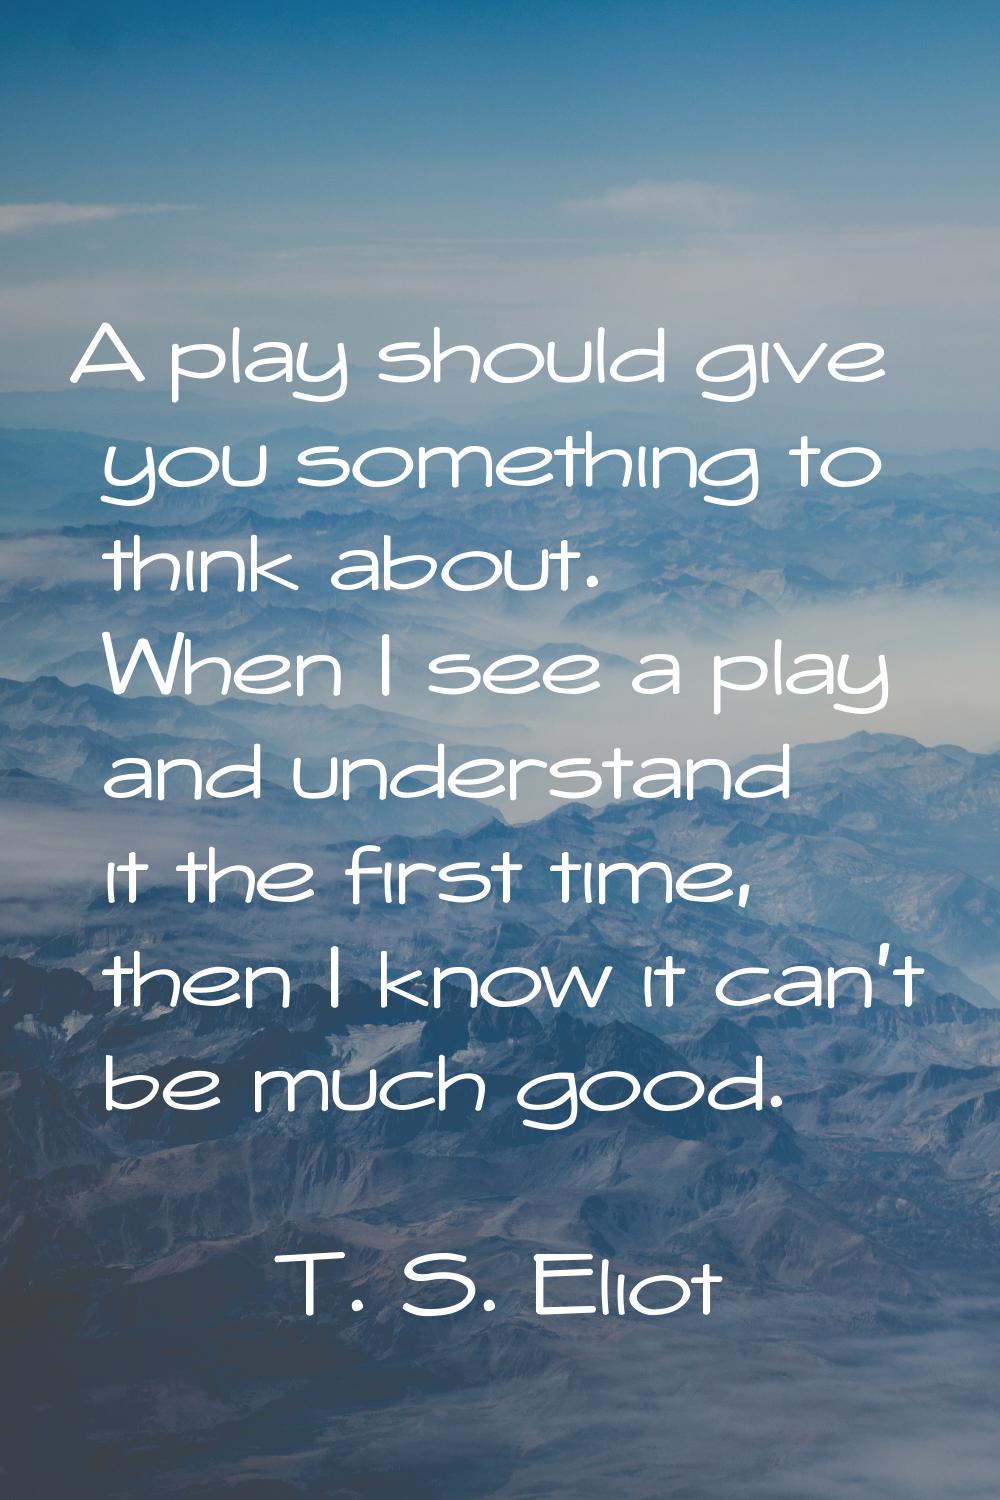 A play should give you something to think about. When I see a play and understand it the first time